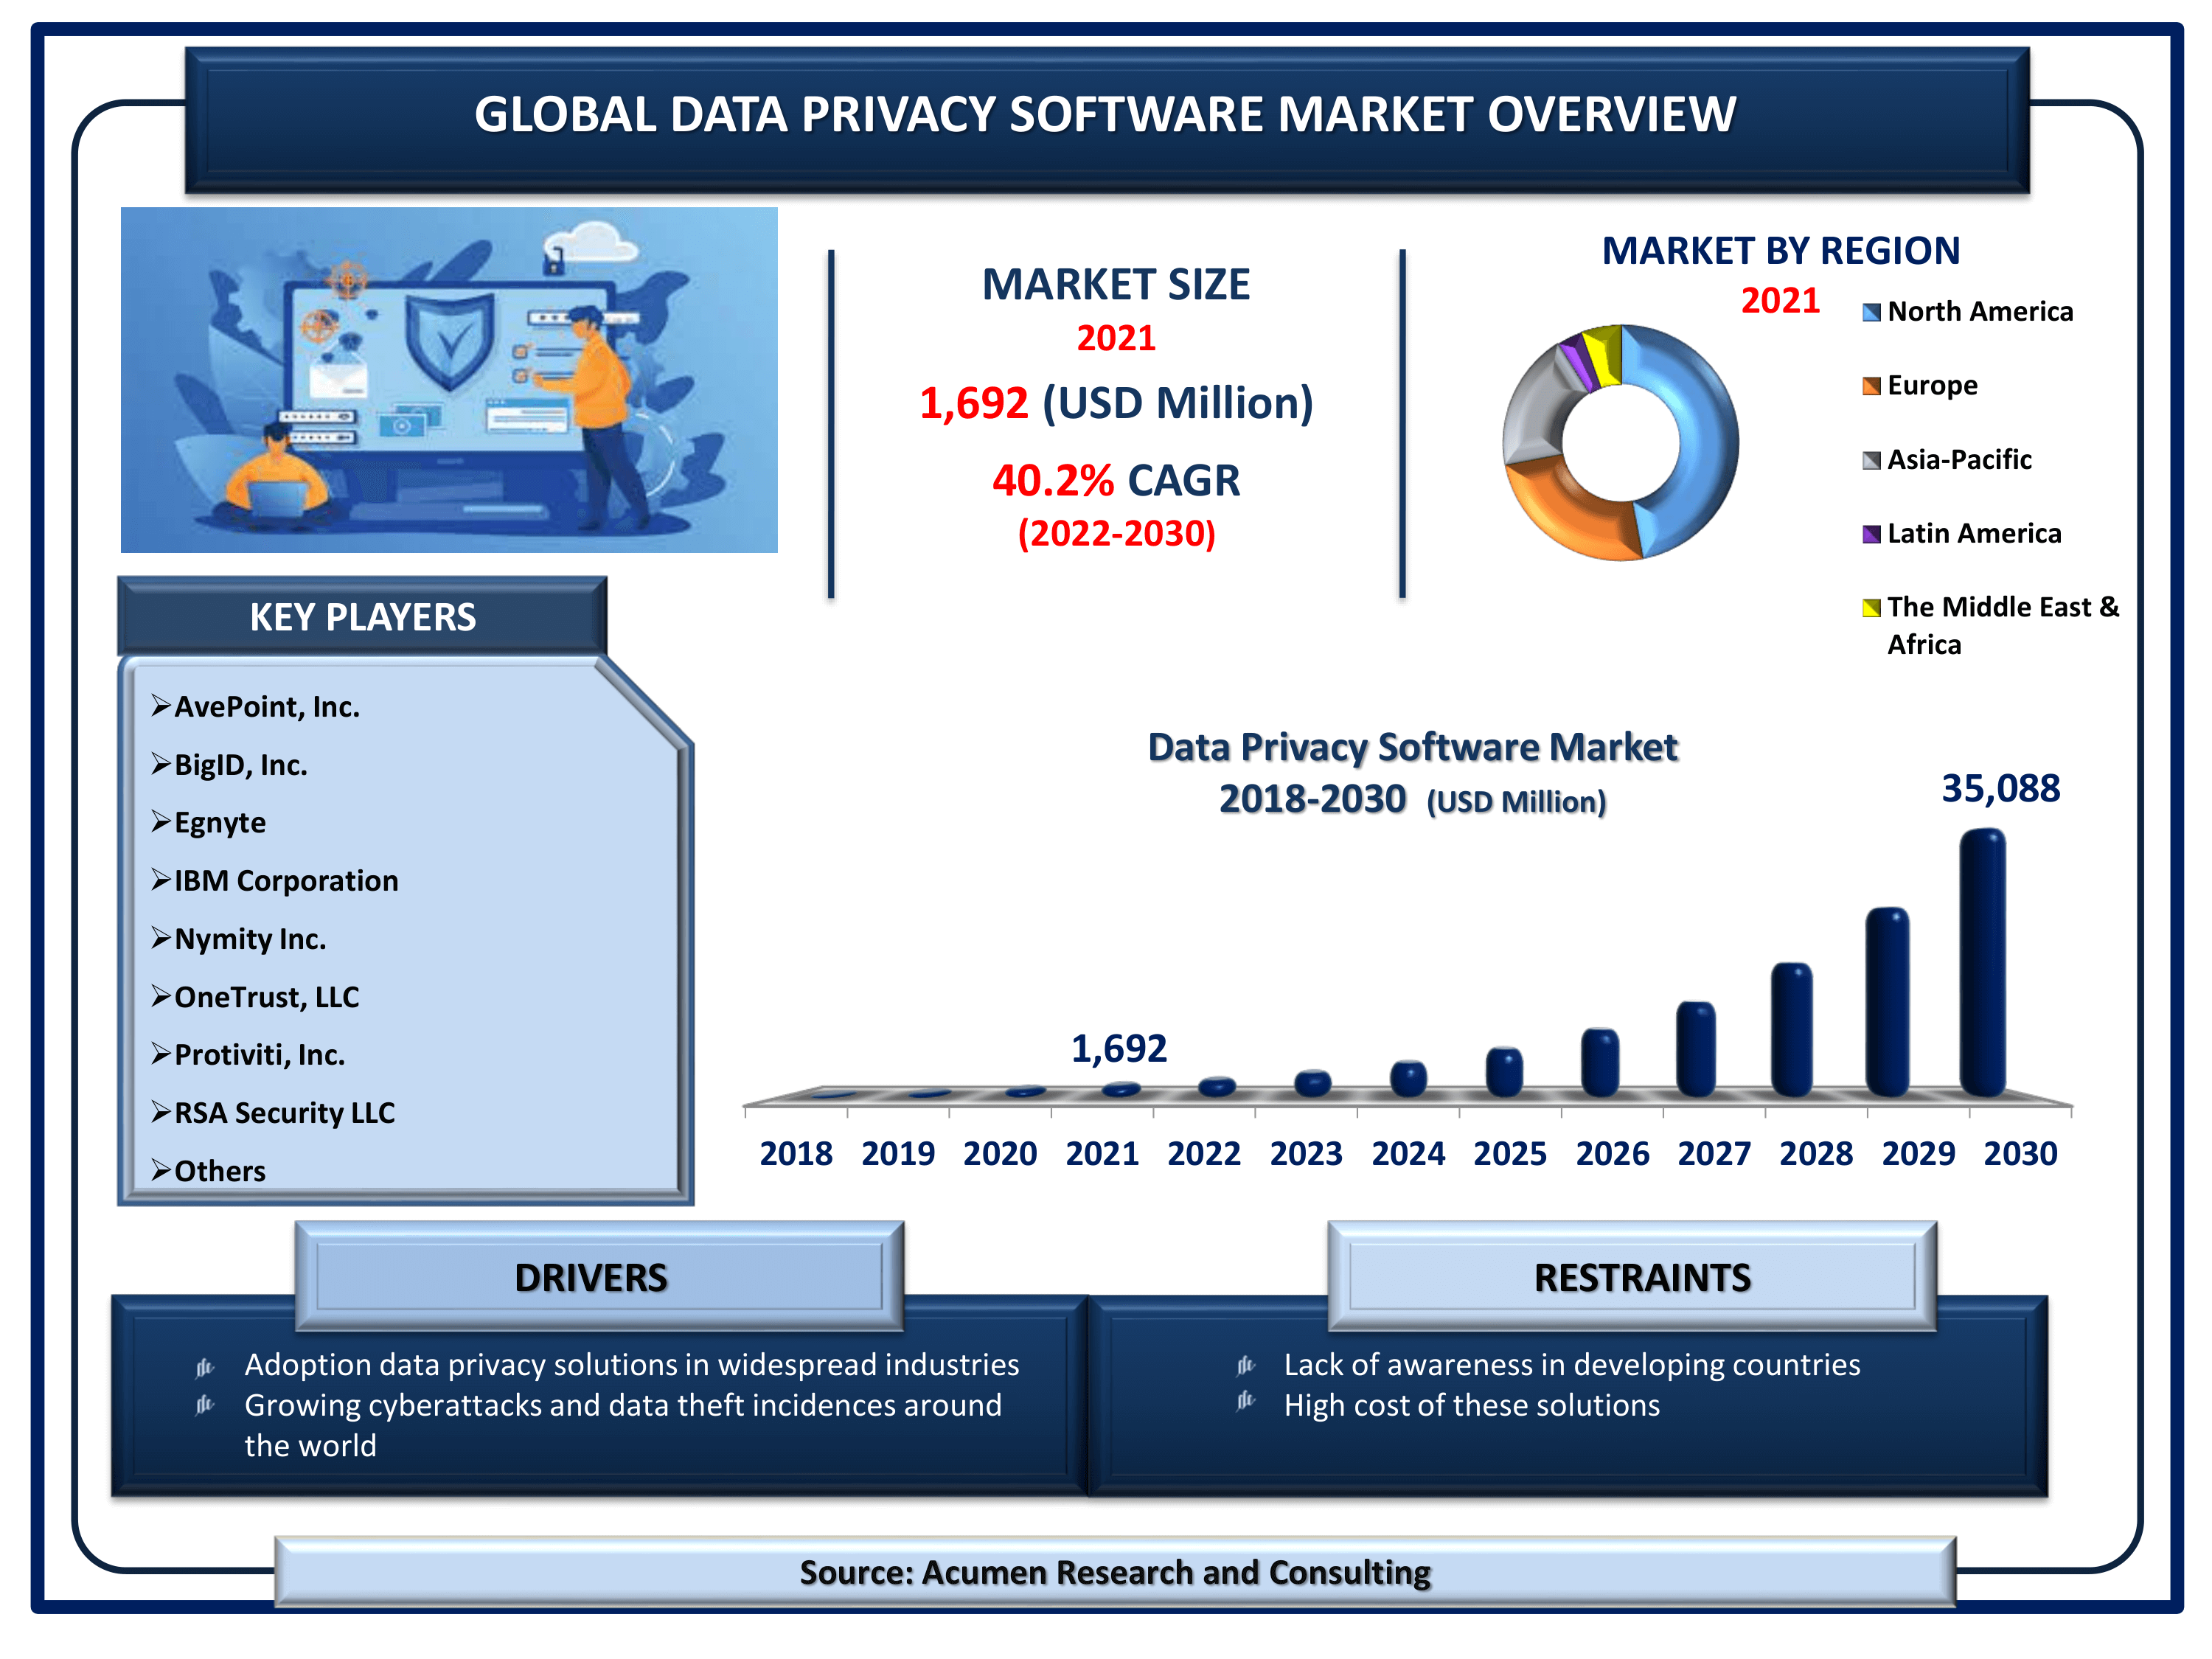 The Global Data Privacy Software Market Size accounted for USD 1,692 Million in 2021 and is estimated to achieve a market size of USD 35,088 Million by 2030; growing at a CAGR of 40.2%.